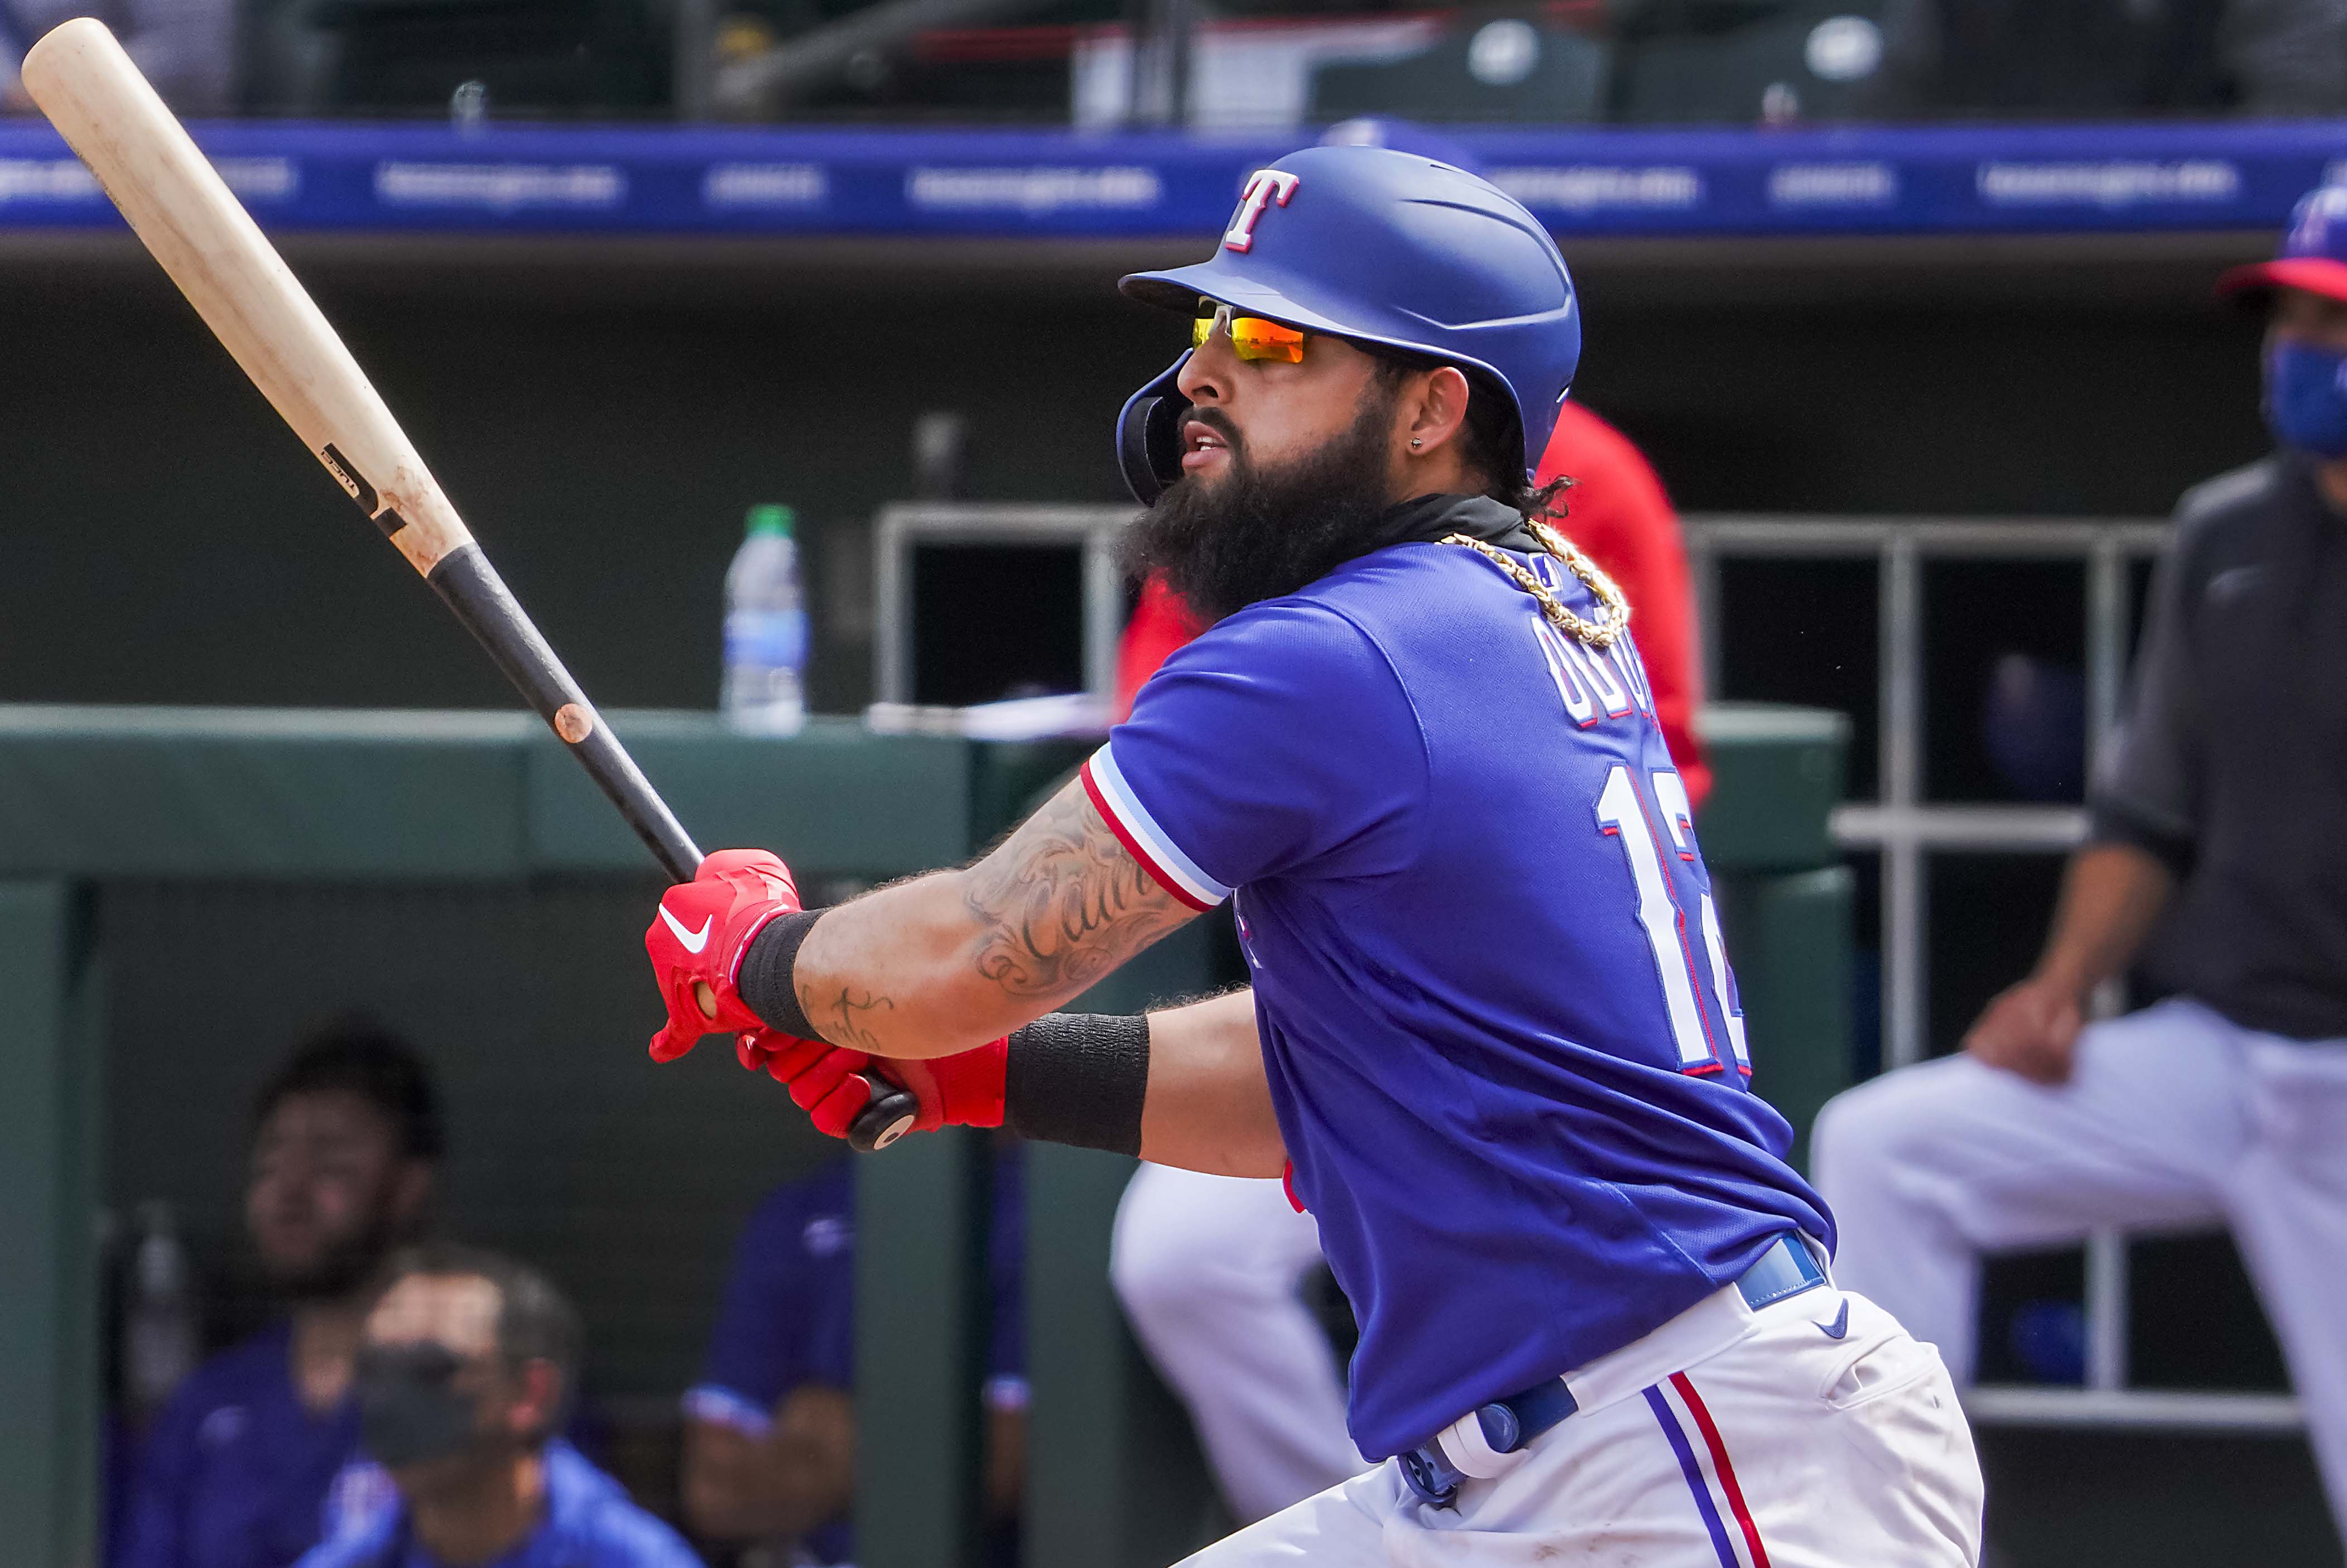 Texas Rangers: Is it finally time to give up on Rougned Odor?